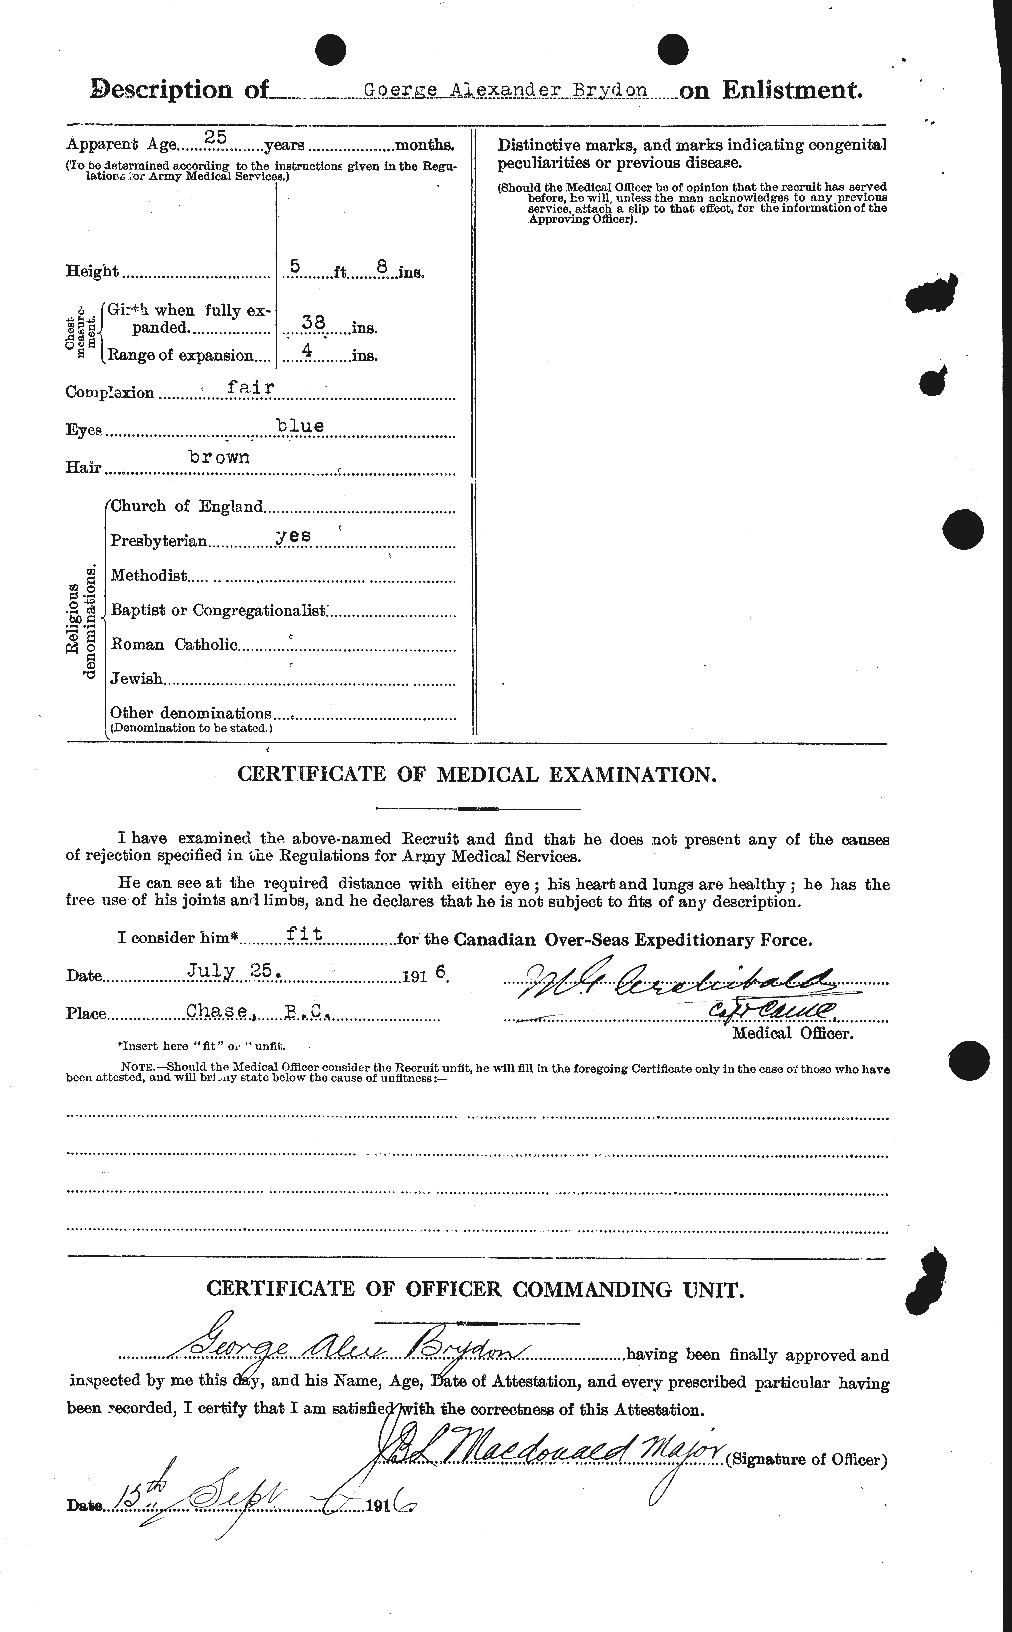 Personnel Records of the First World War - CEF 268833b